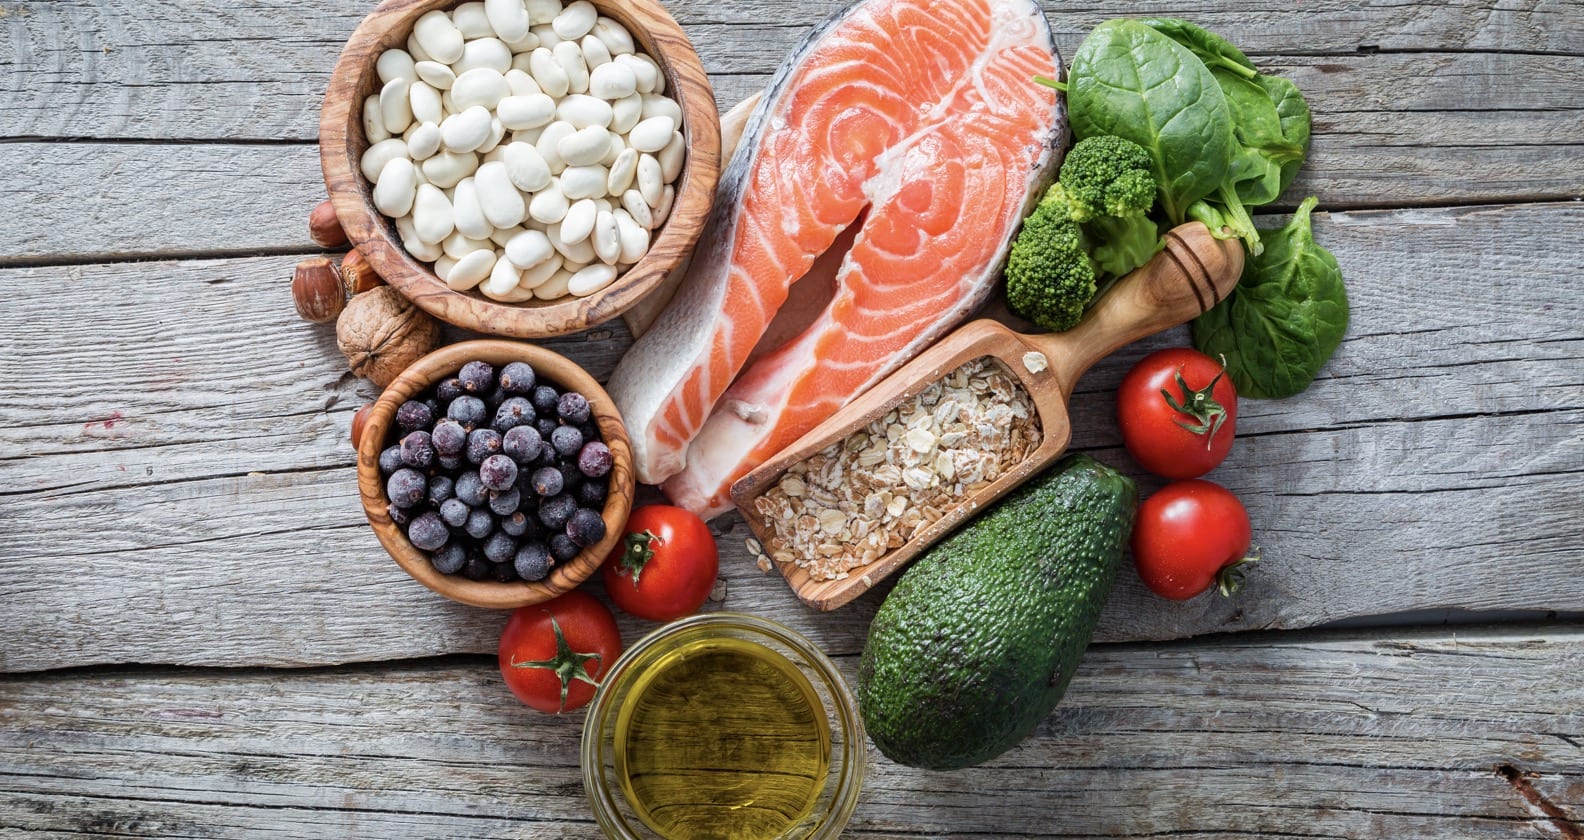 Image for Diets high in vegetables and fish may lower risk of multiple sclerosis